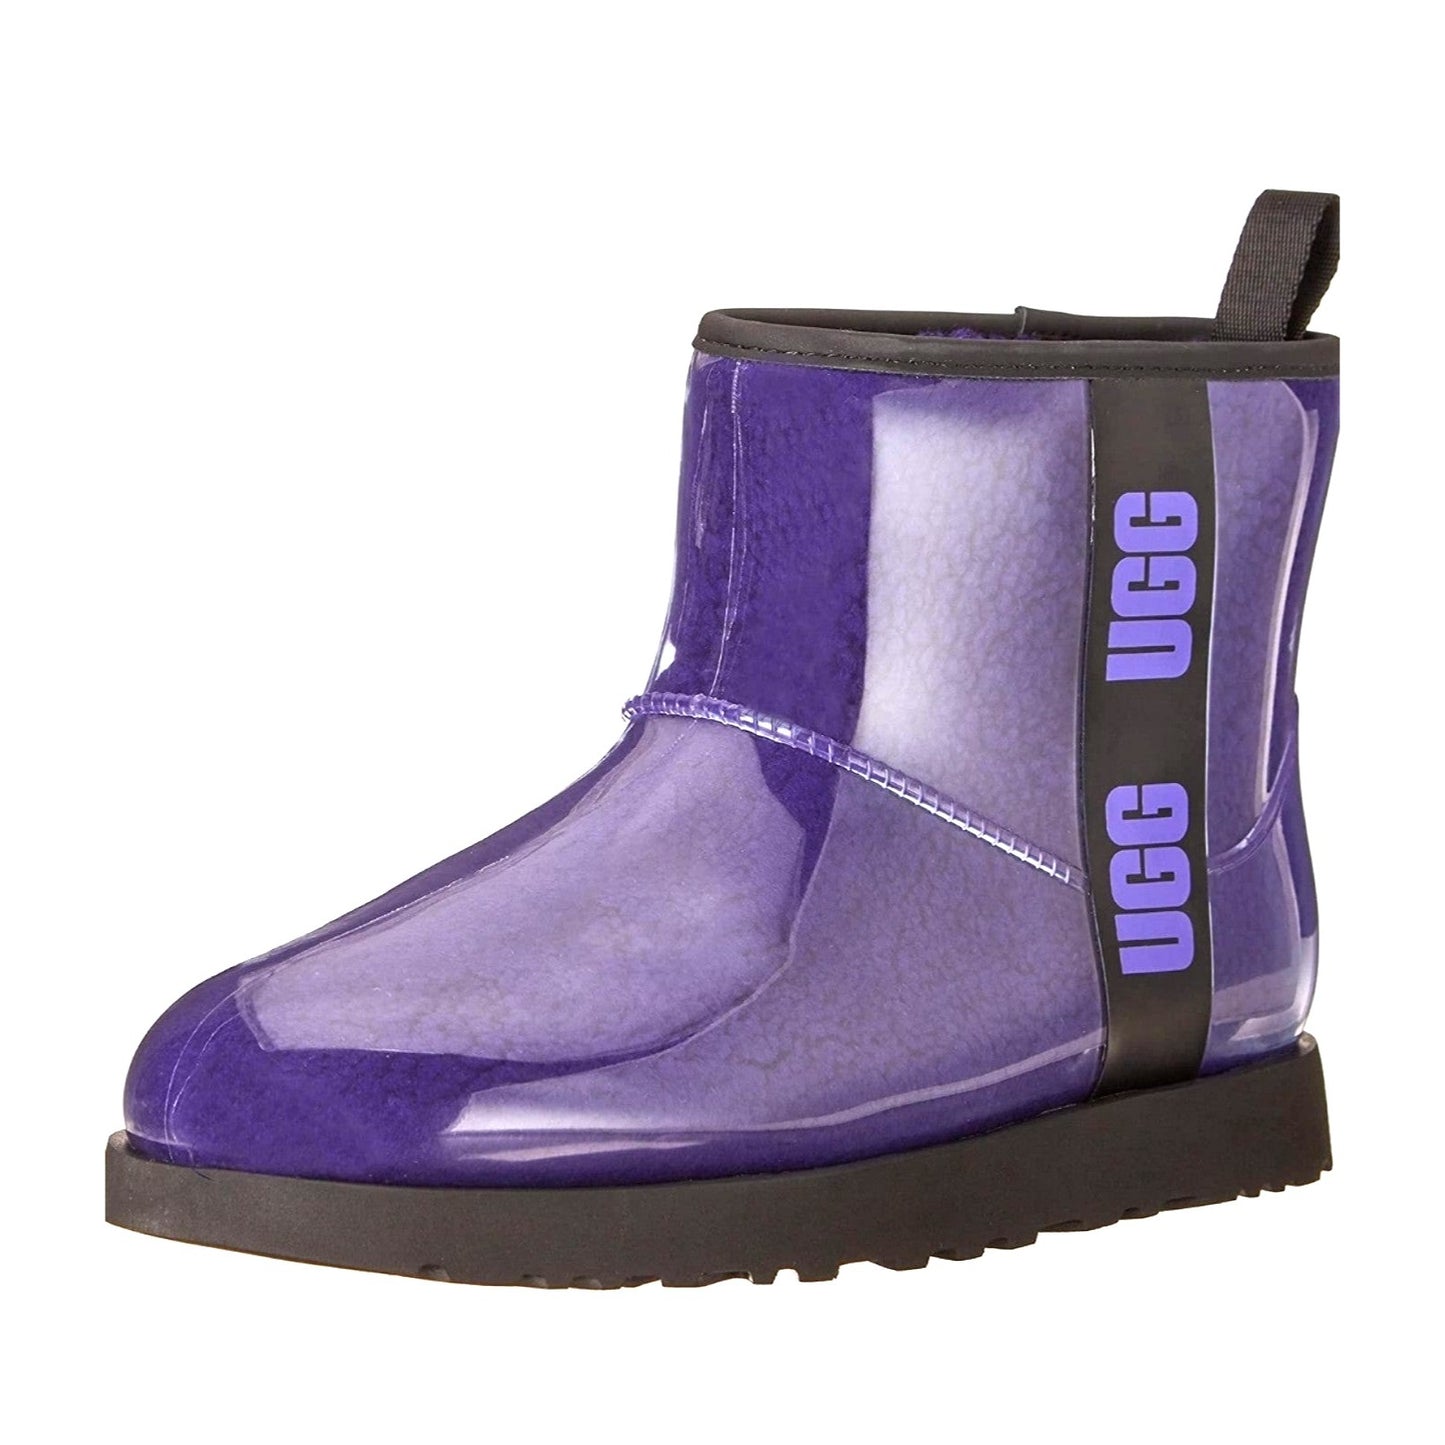 UGG Boots Classic Clear Mini Violet Purple Fur Lined Waterproof Shoes